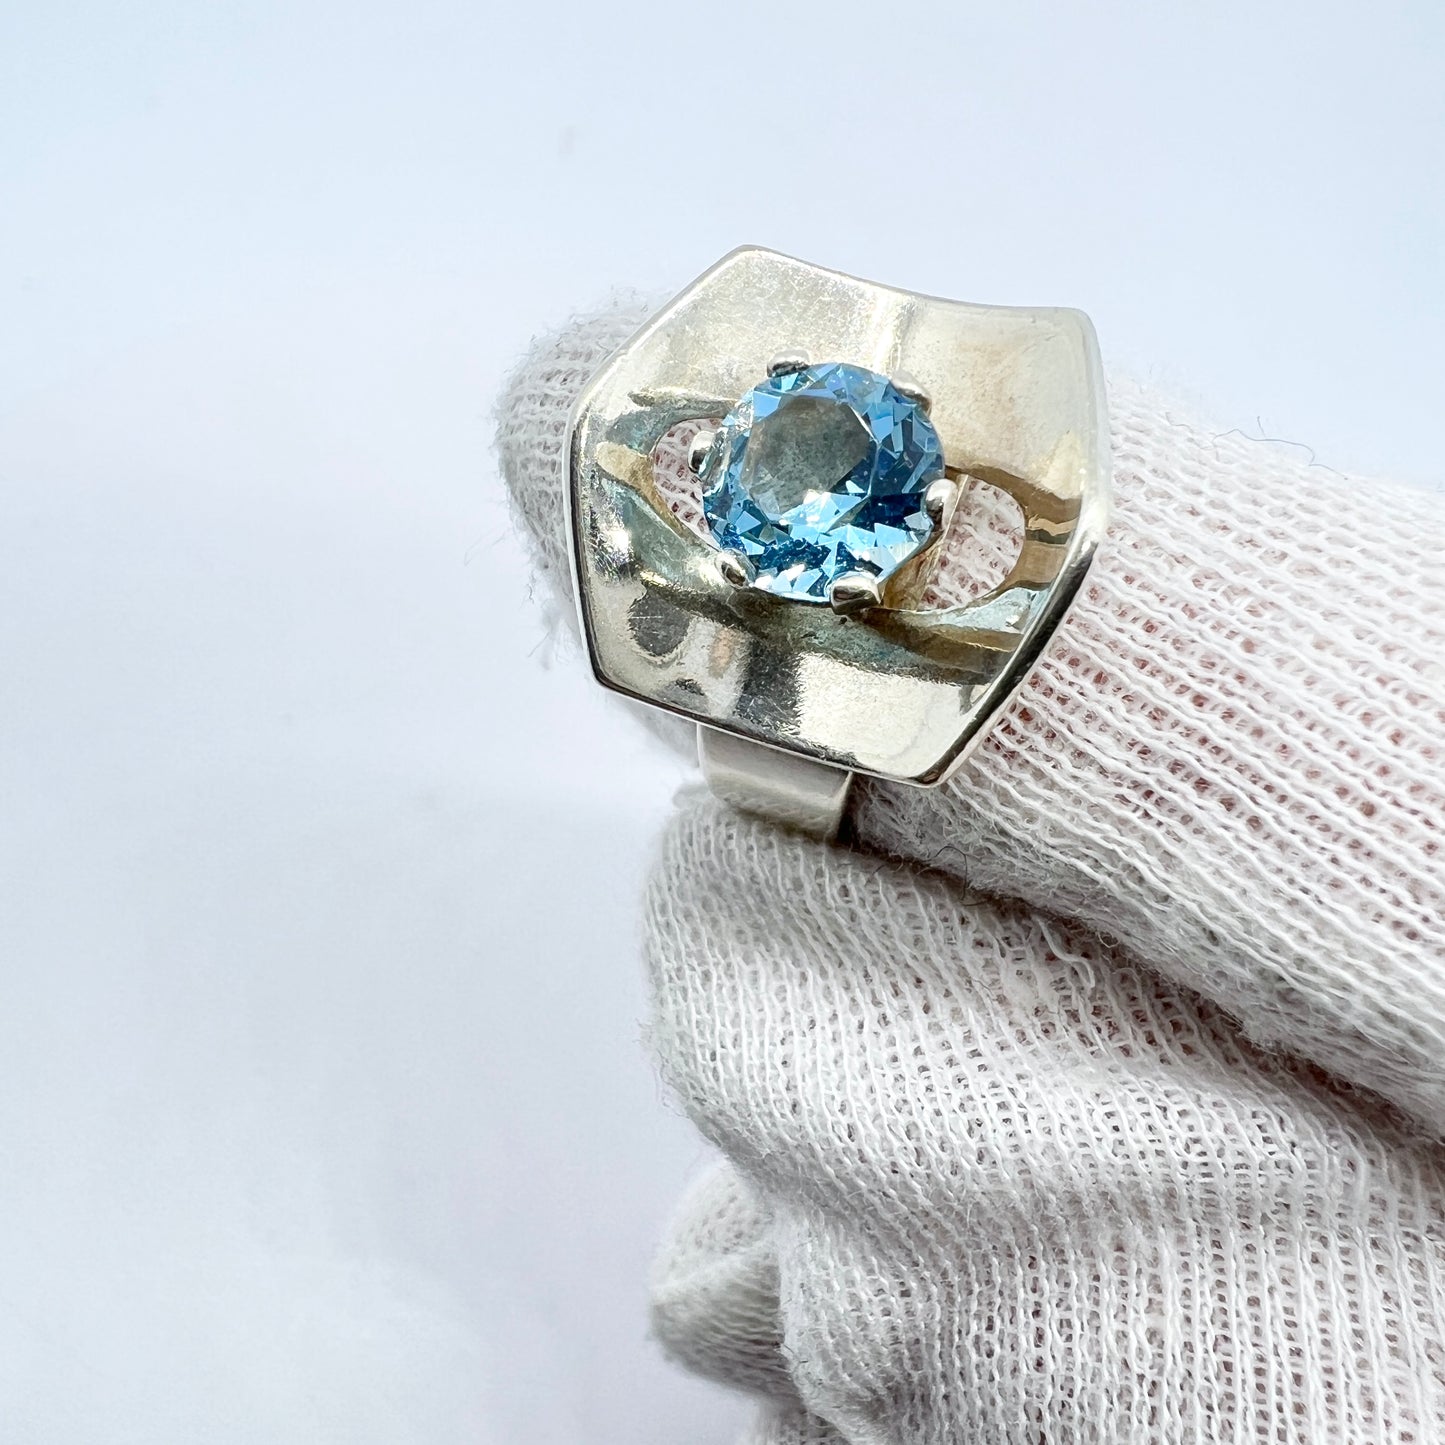 Alton, Sweden 1975. Vintage Sterling Silver Icy Blue Paste Stone Ring.